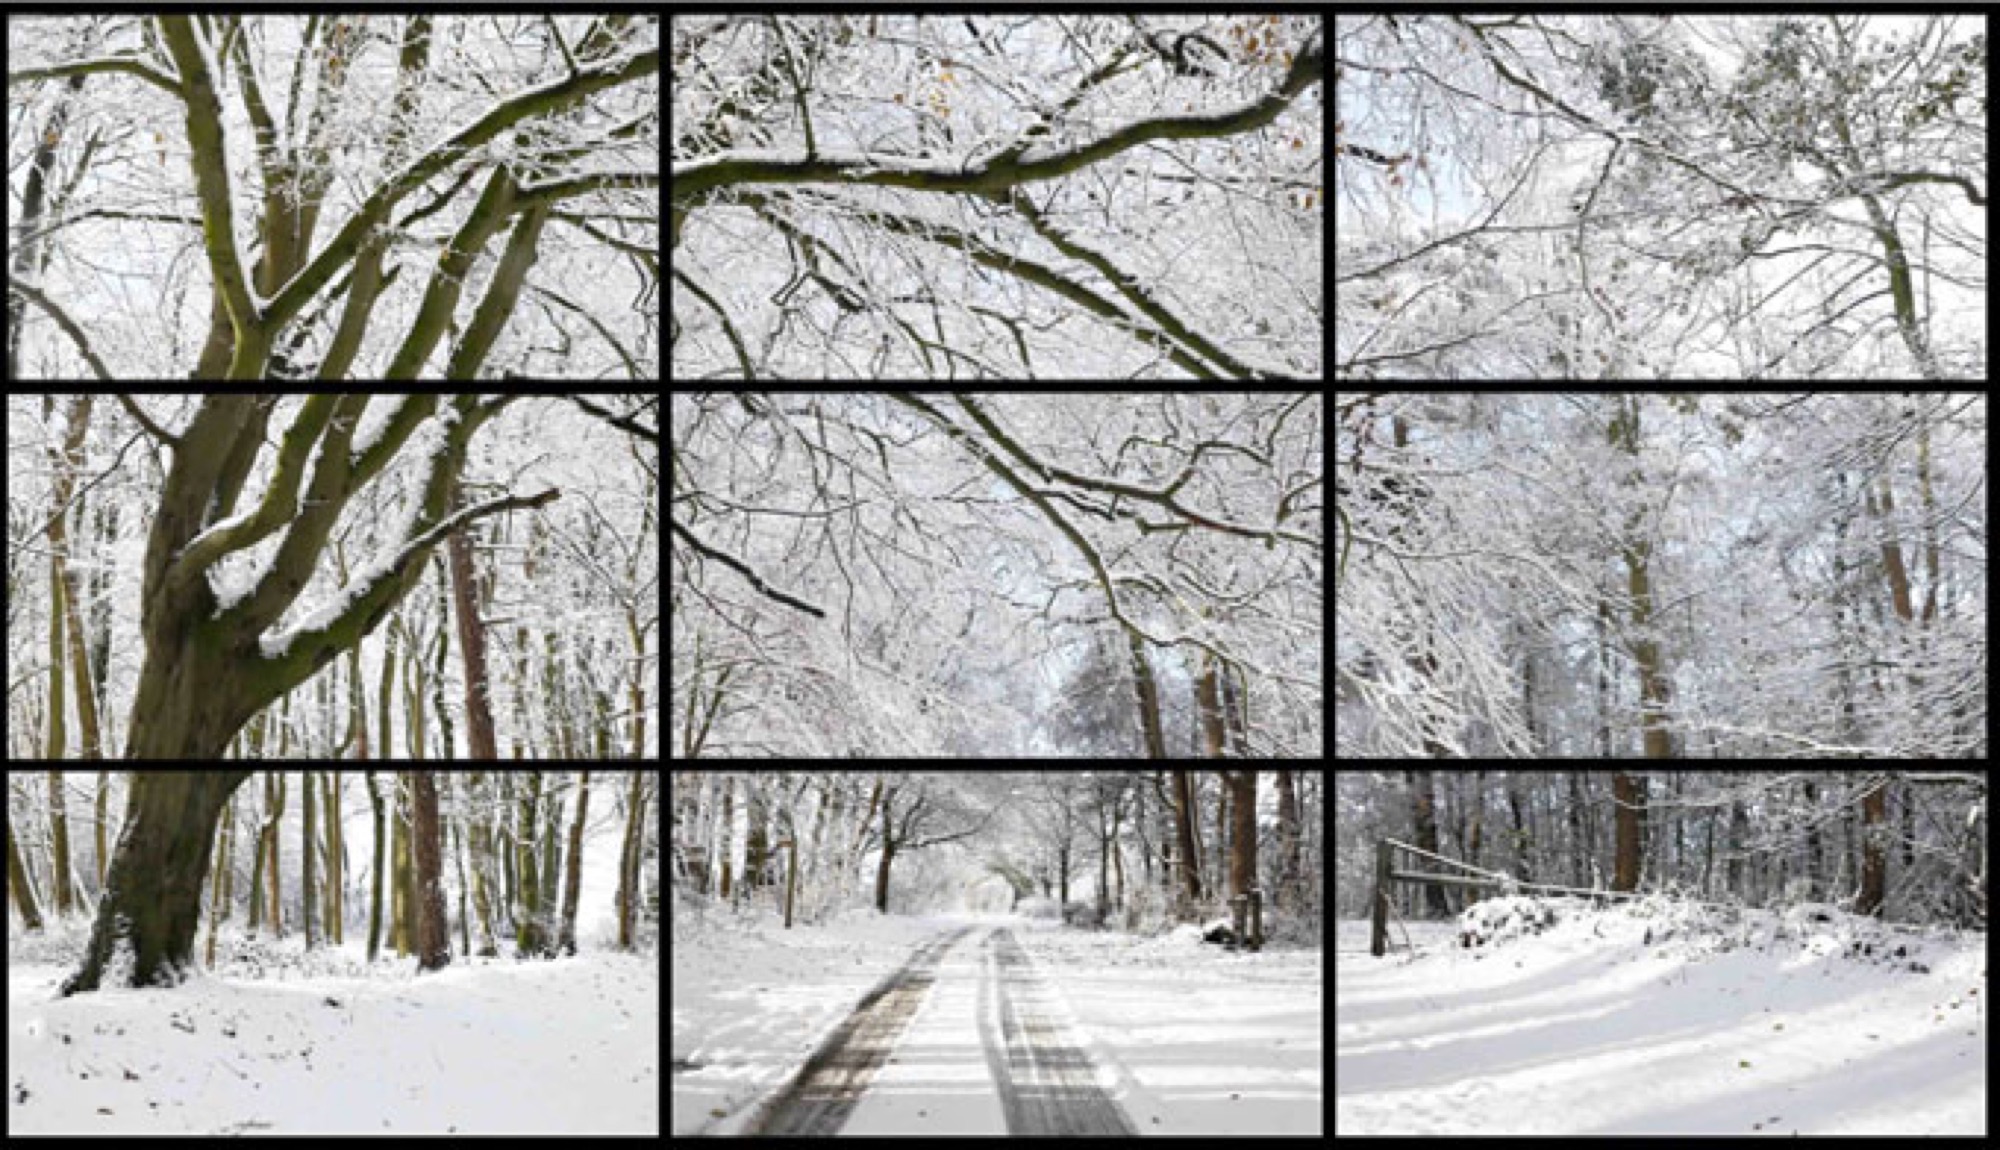 David Hockney, <em>The four seasons, Woldgate Woods<br />
(Spring 2011, Summer 2010, Autumn 2010, Winter 2010)</em>, 2010–2011, 36 digital videos synchronised and presented on 36 55-inch screens to comprise a single artwork, silent, 4 mins 18 secs. Collection of the artist © David Hockney